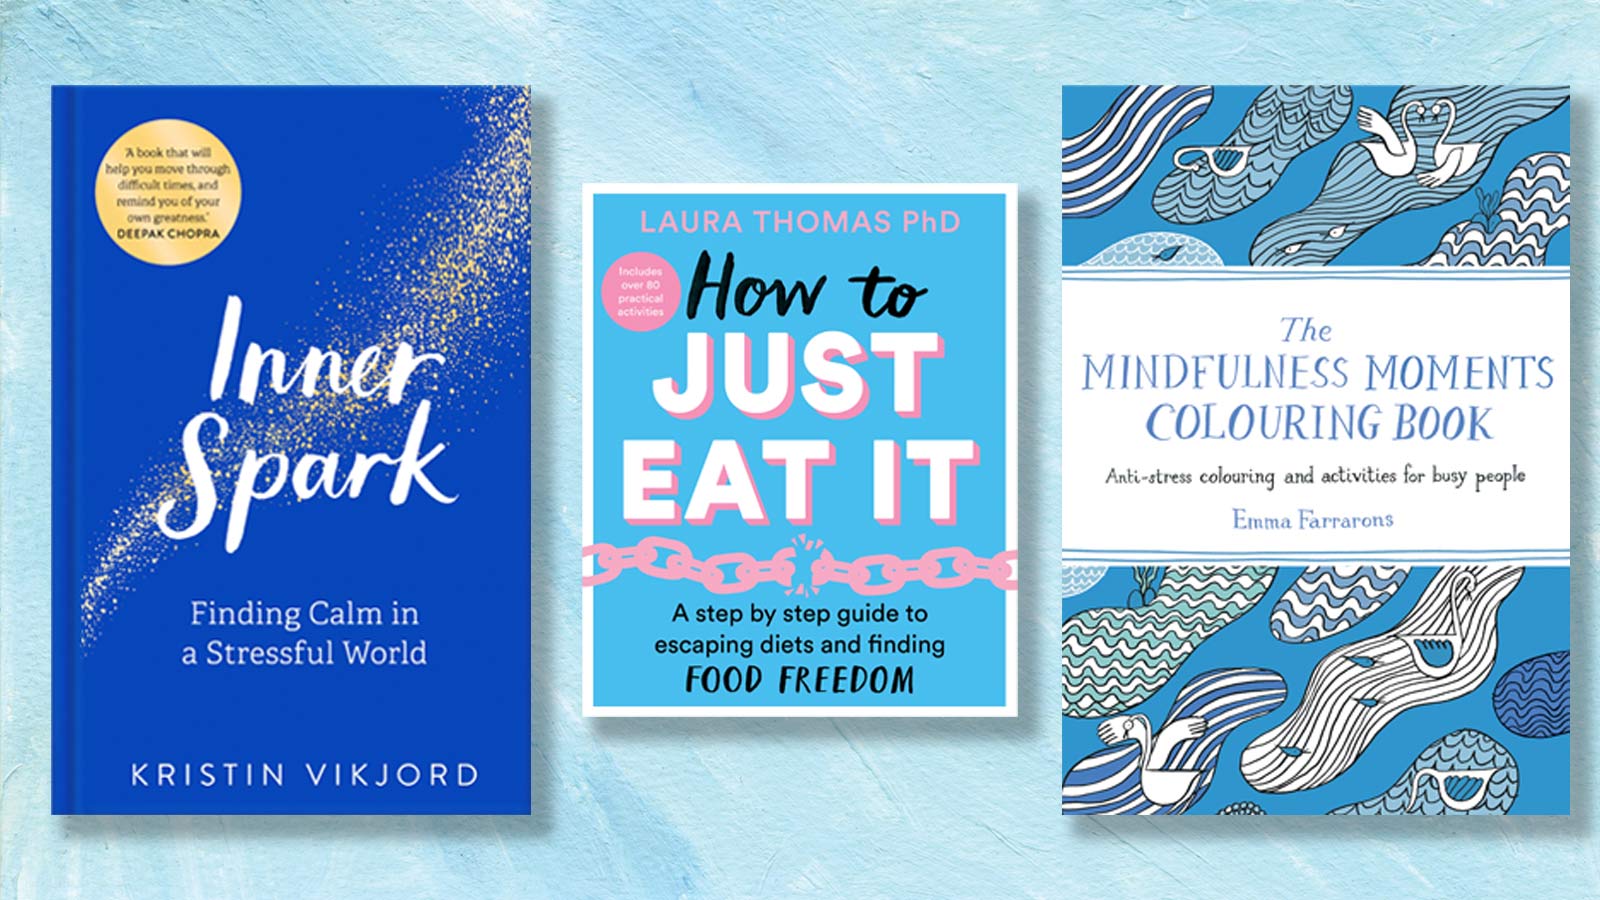 Book covers for Inner Spark, How to Just Eat it and The Mindfulness Moments Colouring Book on a light blue background